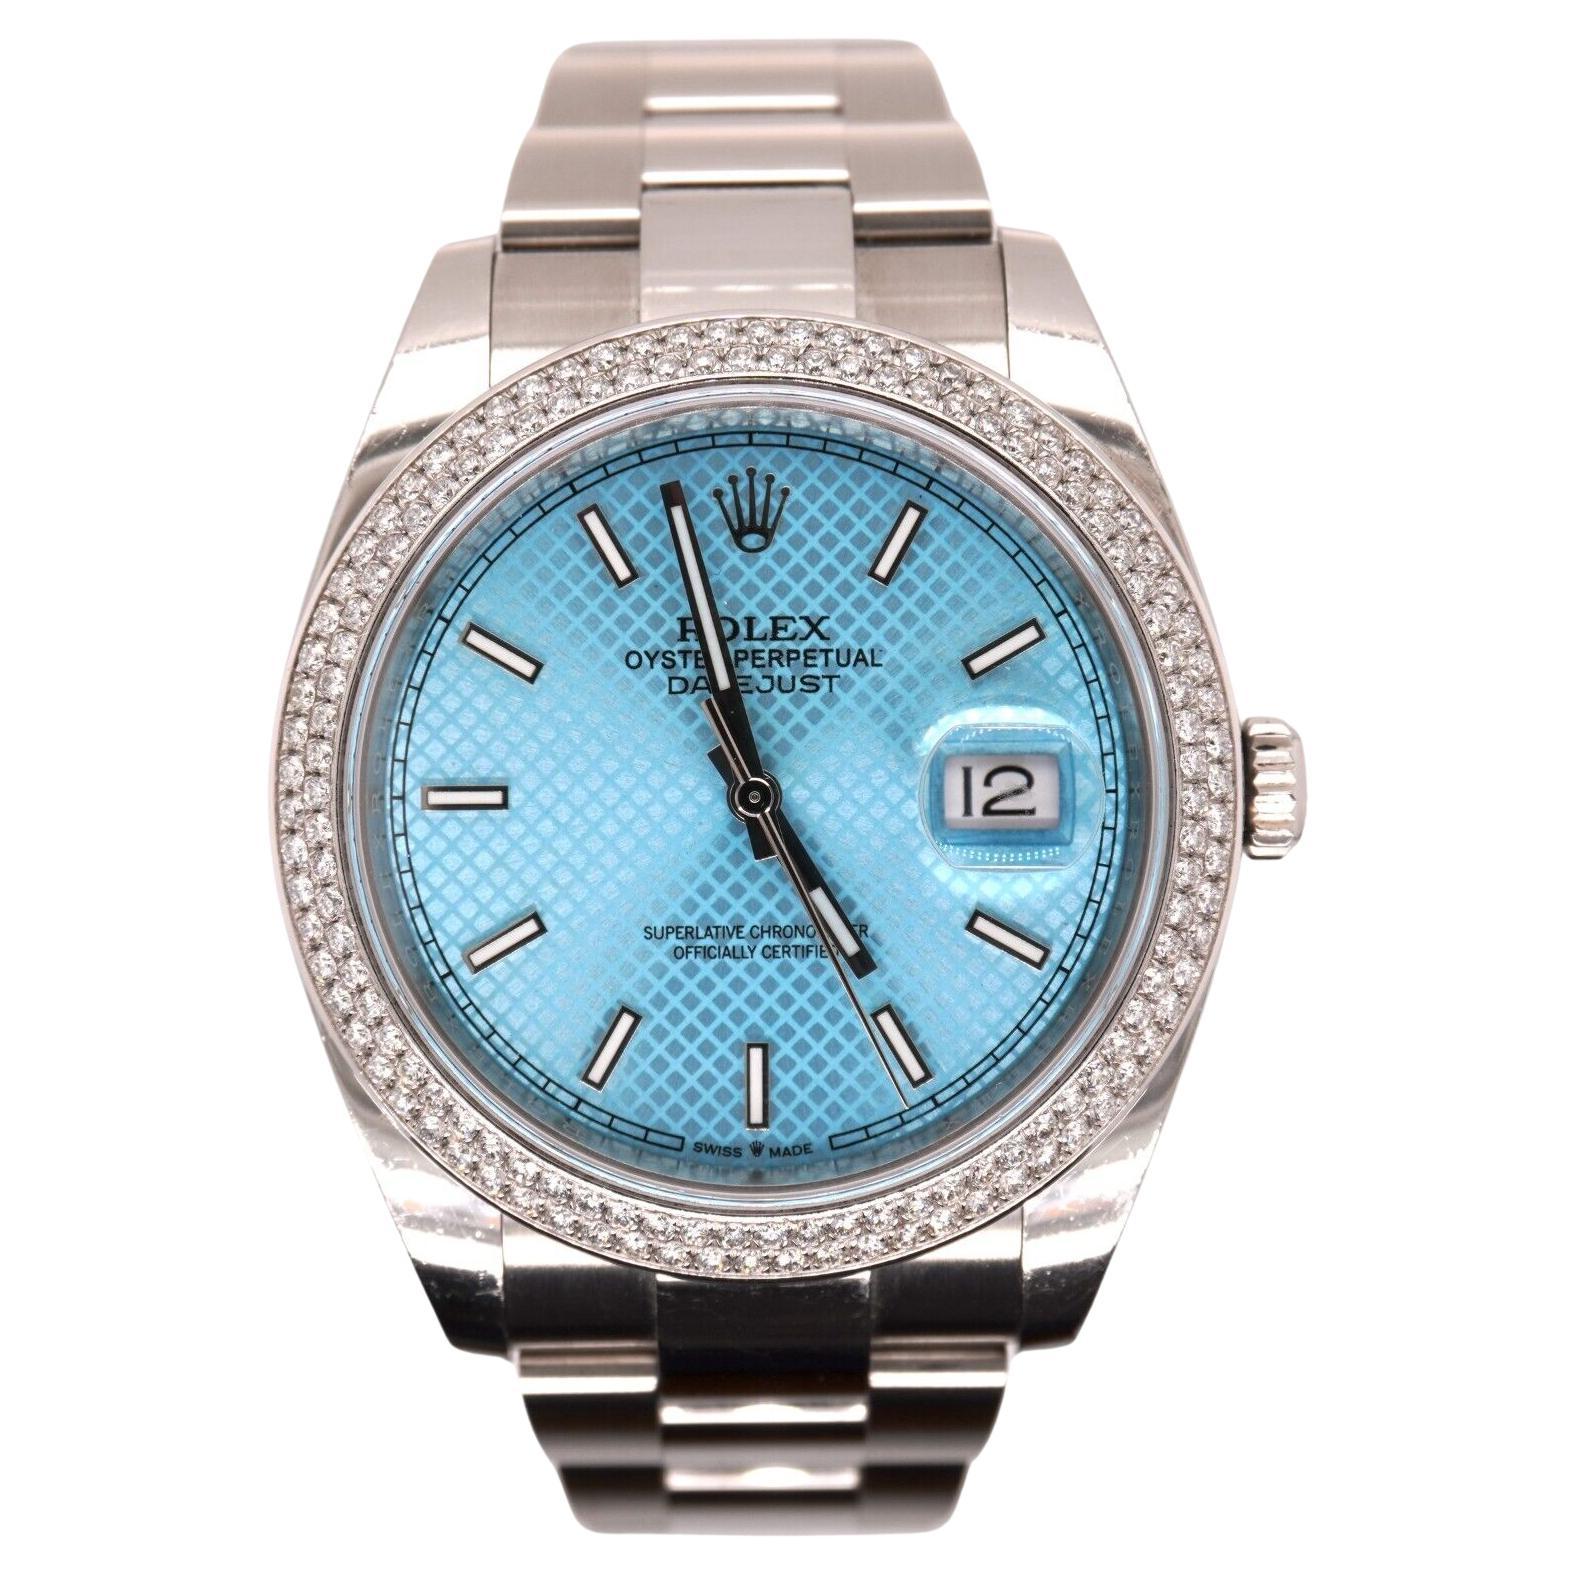 Rolex Men's Datejust 41mm Oyster Steel Watch ICED 2.50ct Diamond ICE Blue Dial